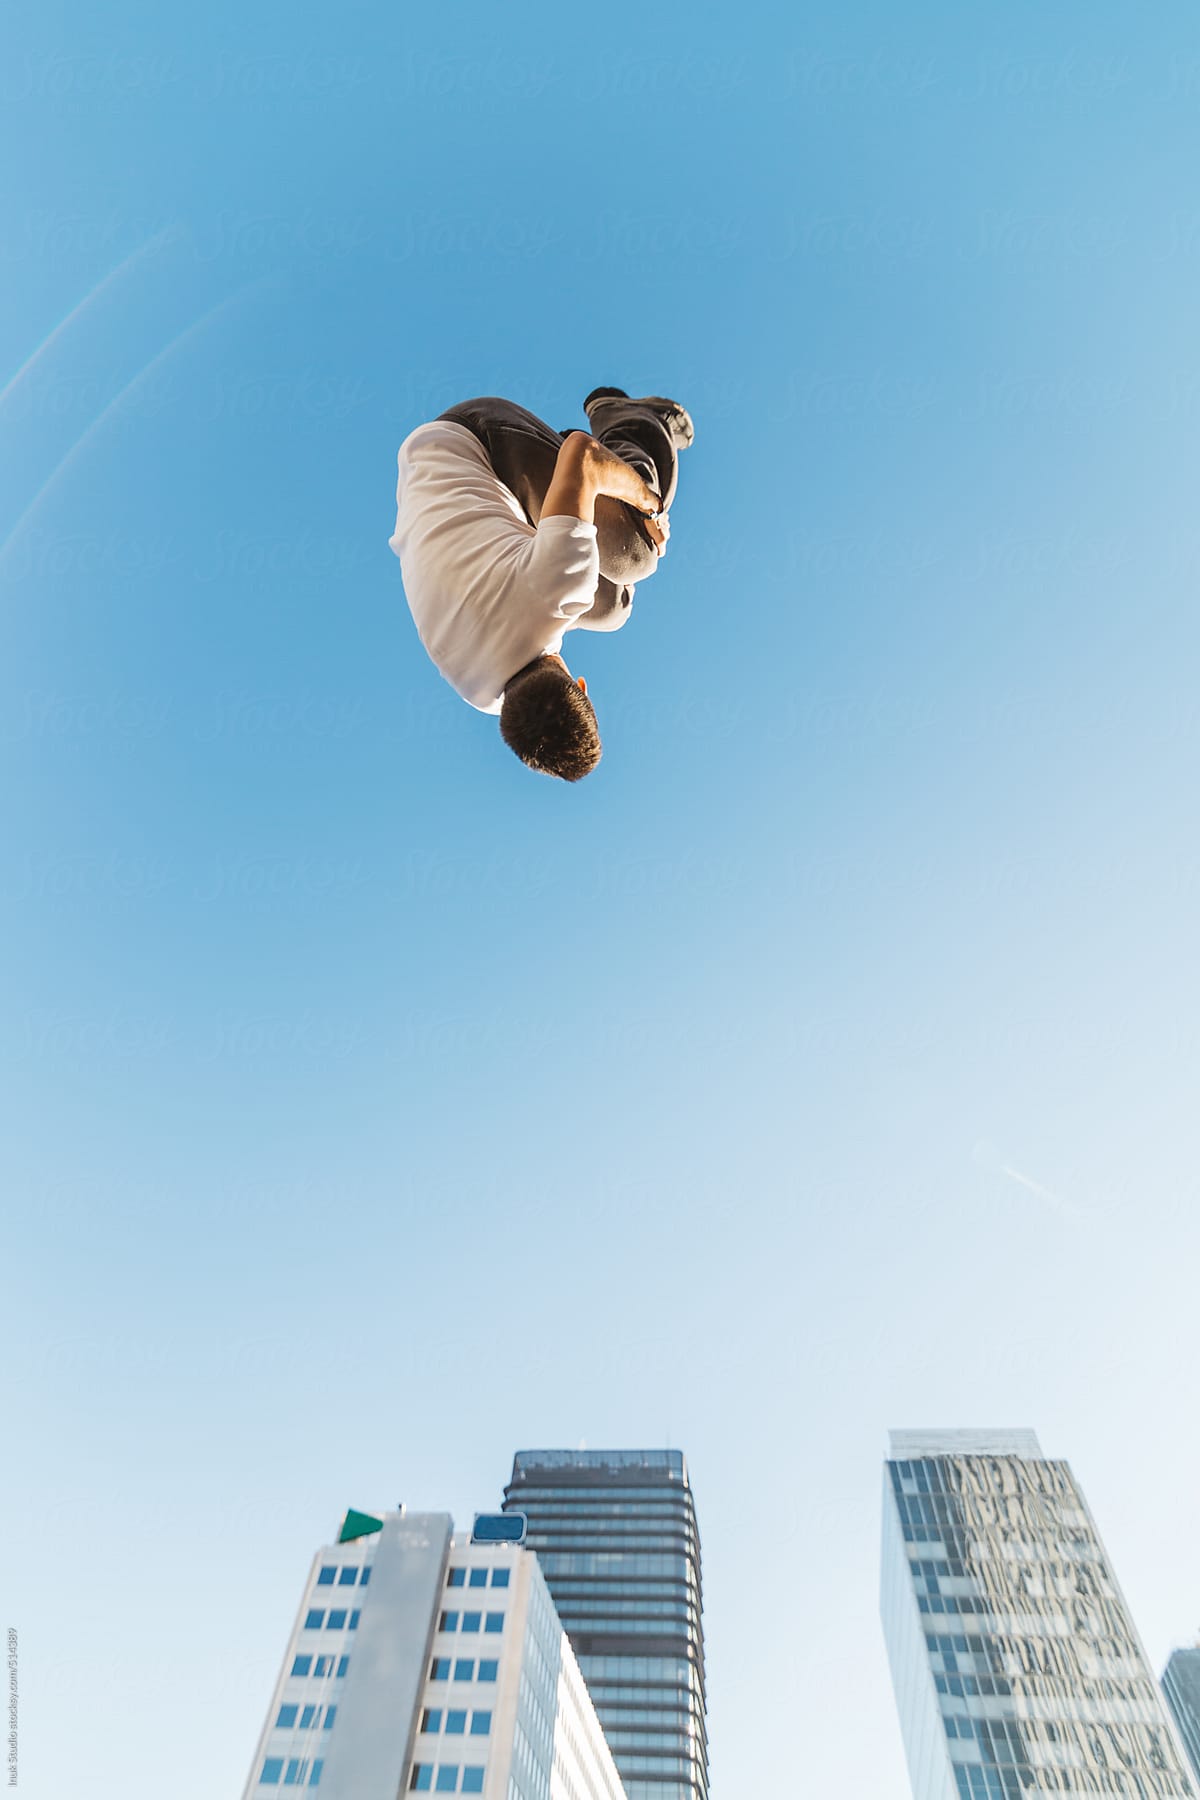 Low-angle photography of a man doing a somersault in the air